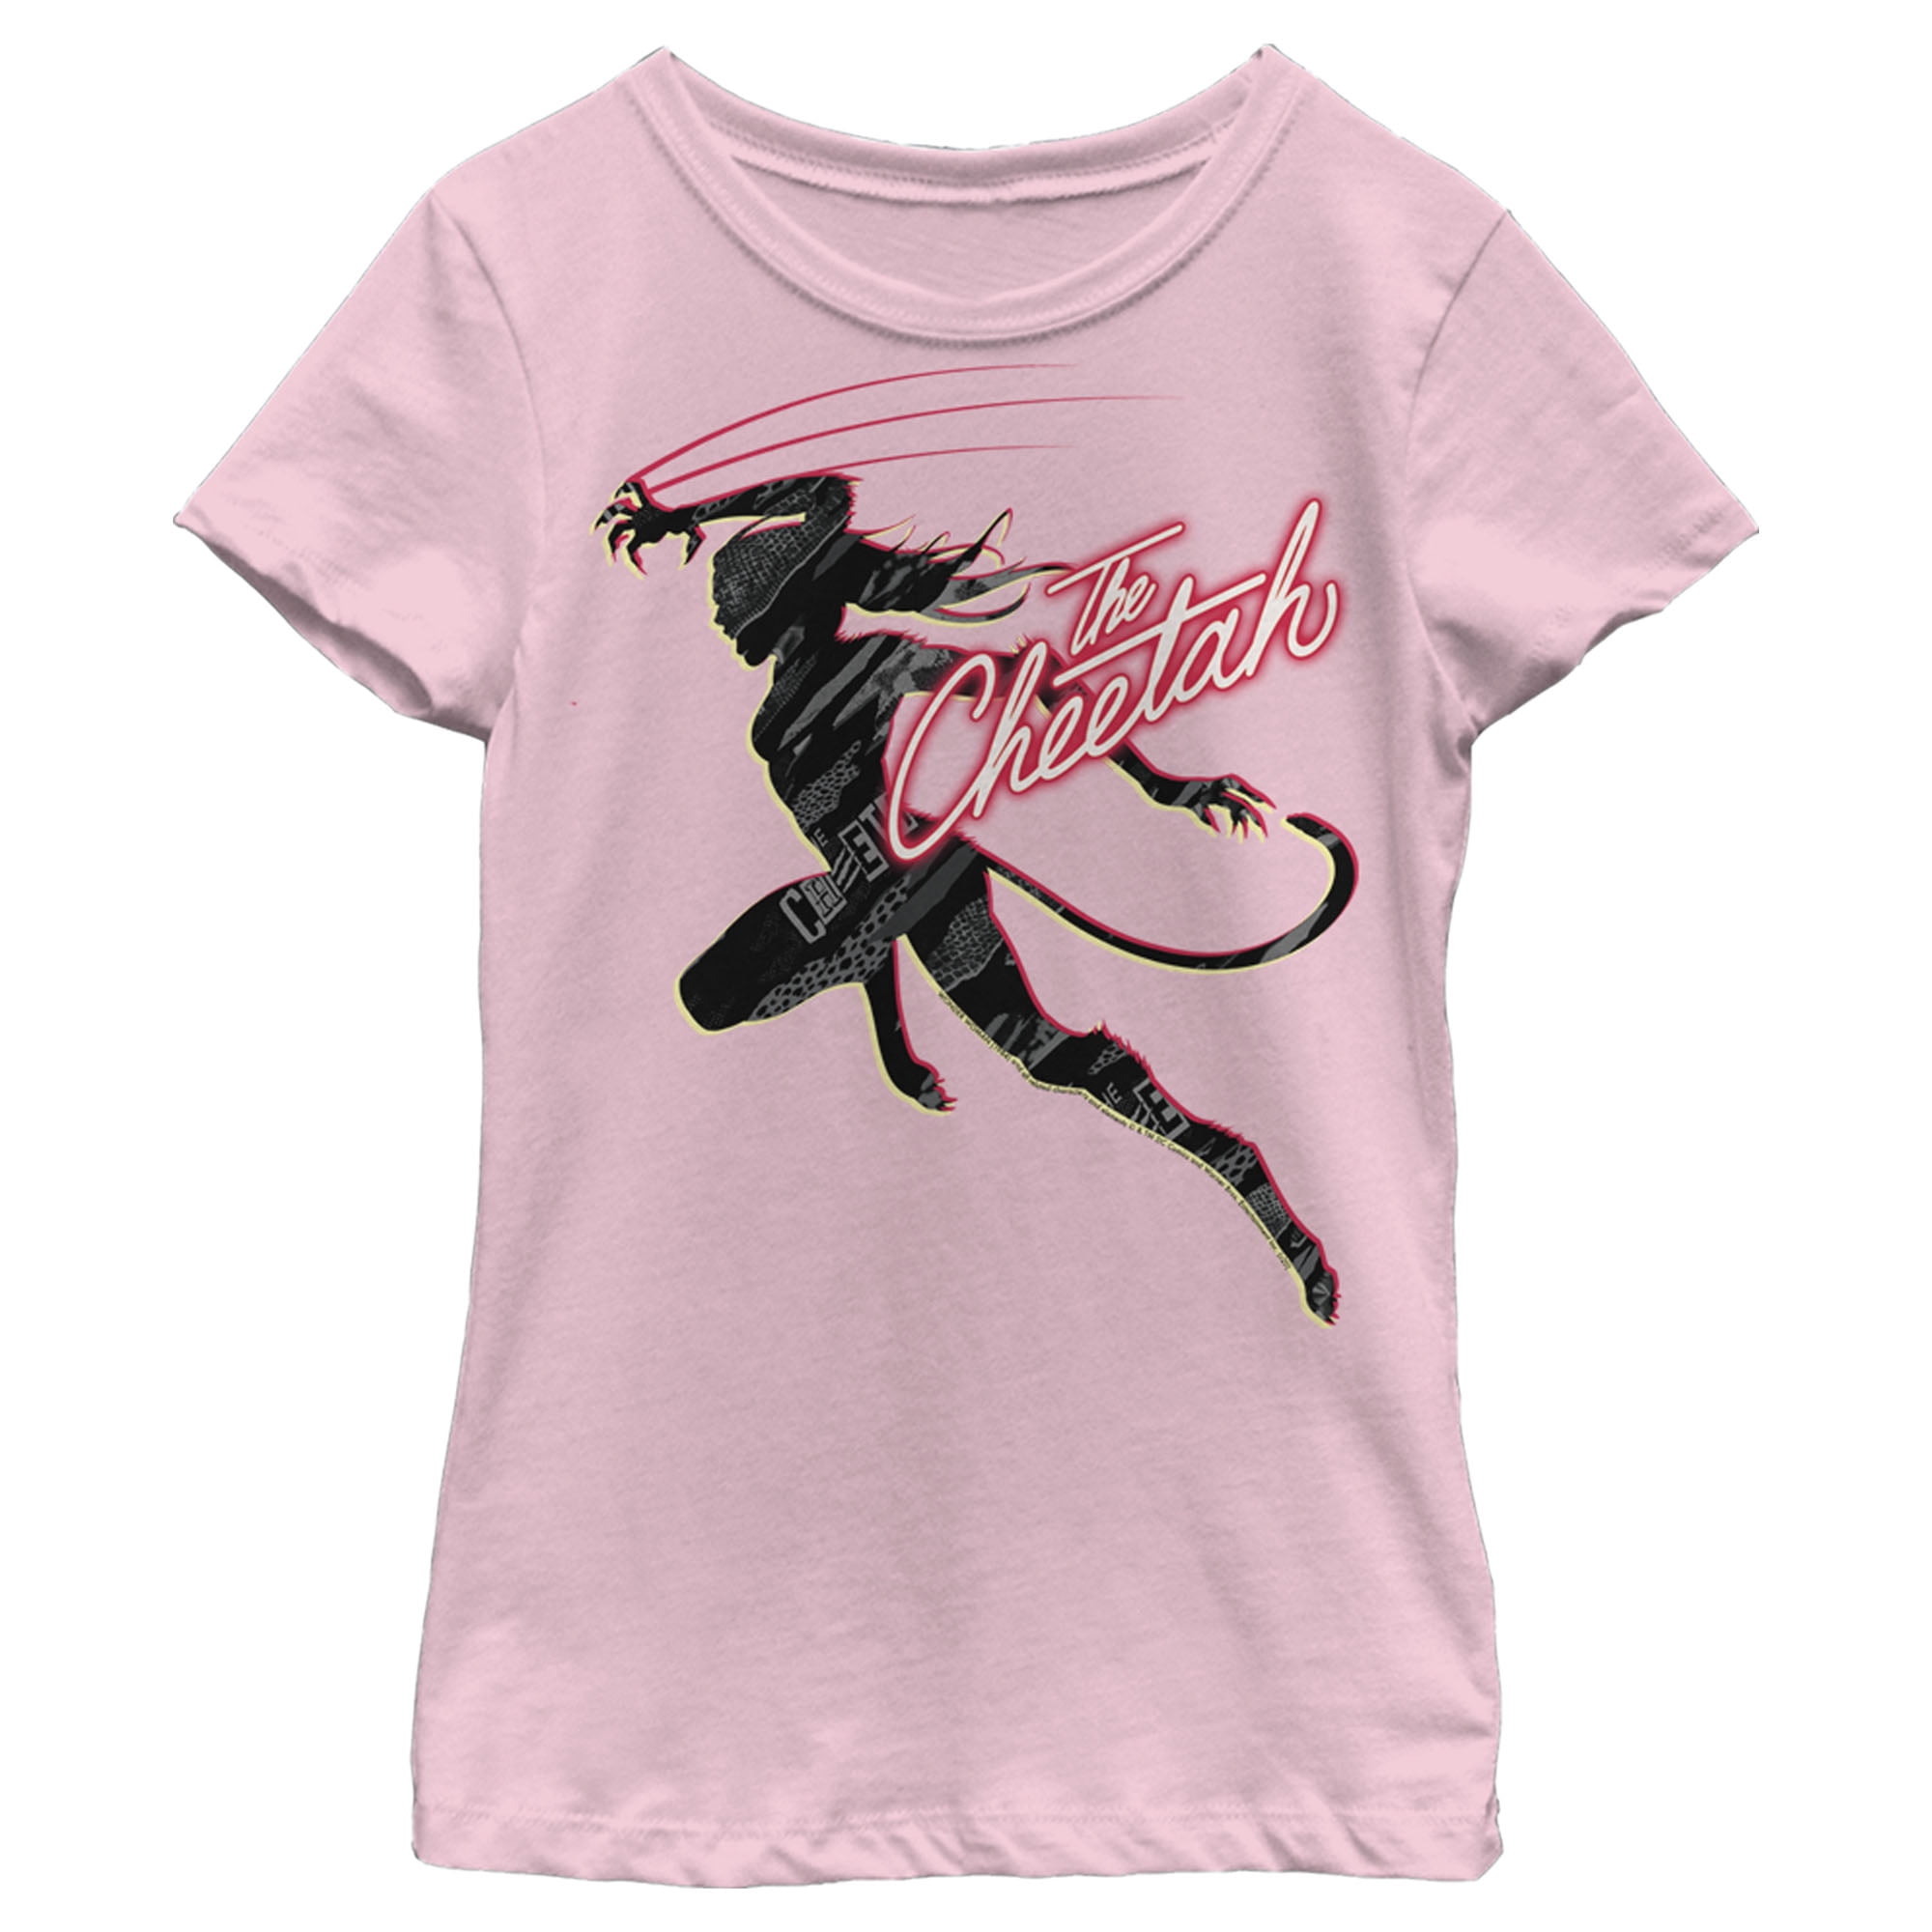 Cute Pink Cheetah Youth Fashion Tops Casual Short Sleeve Print T-Shirts for Boys and Girls